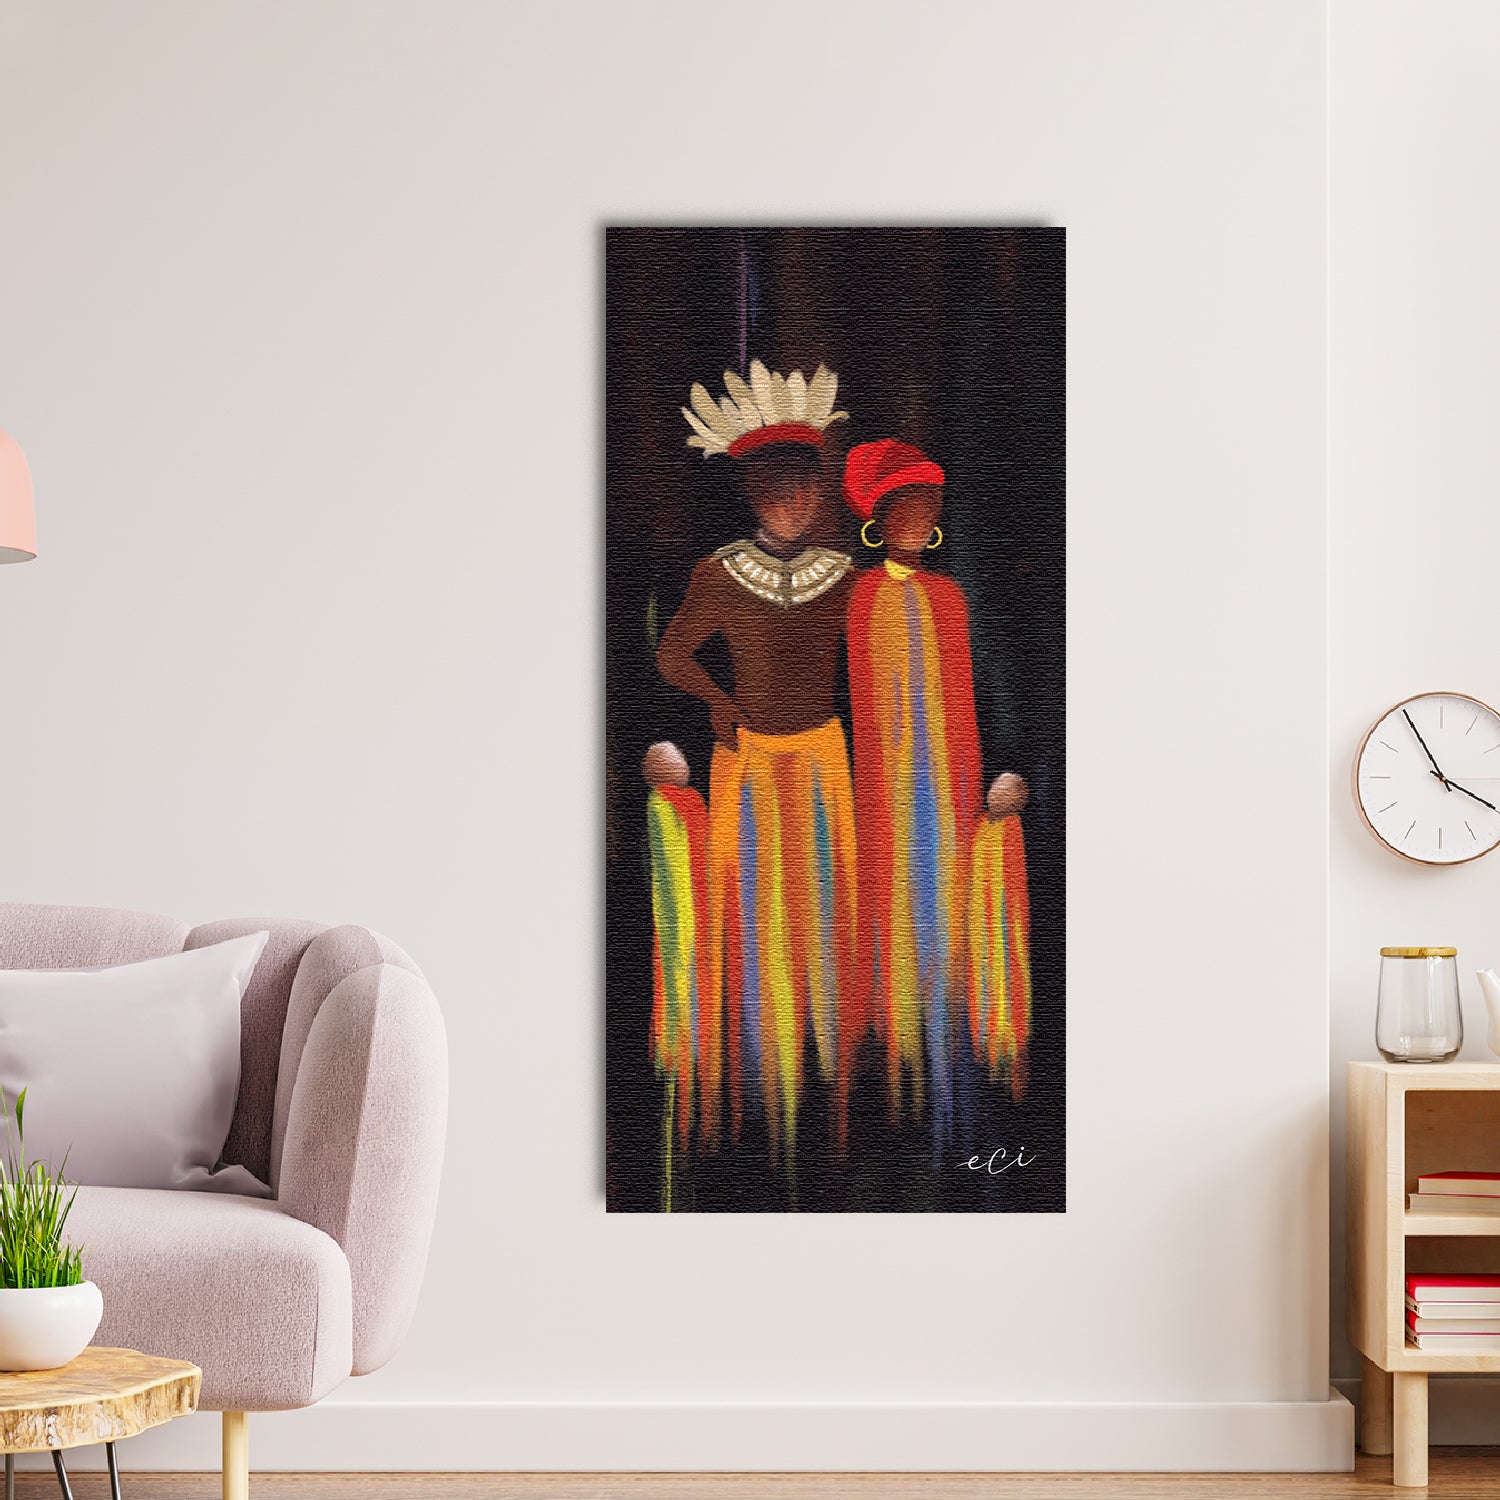 Tribal Family Original Design Canvas Printed Wall Painting